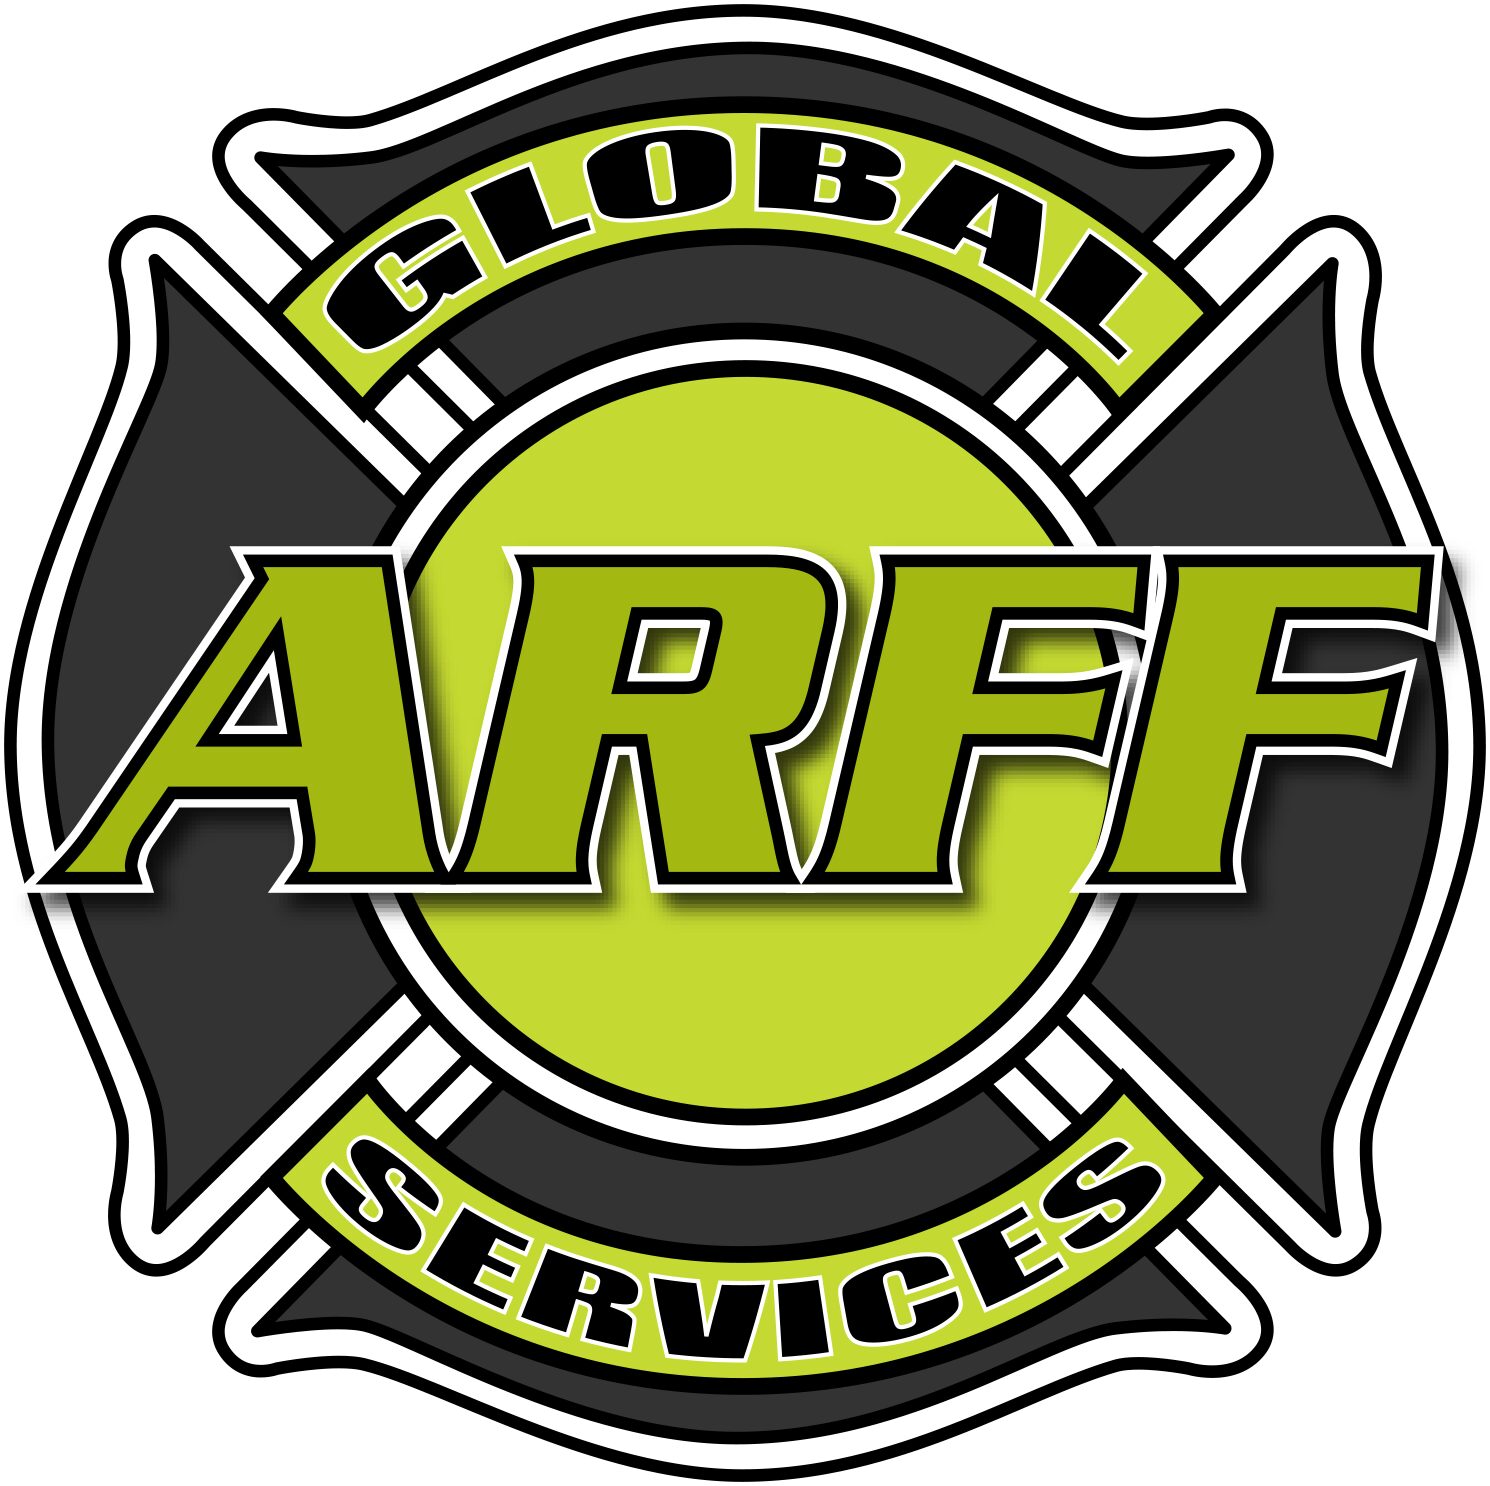 https://taevt.org/wp-content/uploads/2022/03/global-arff-services-1.jpg